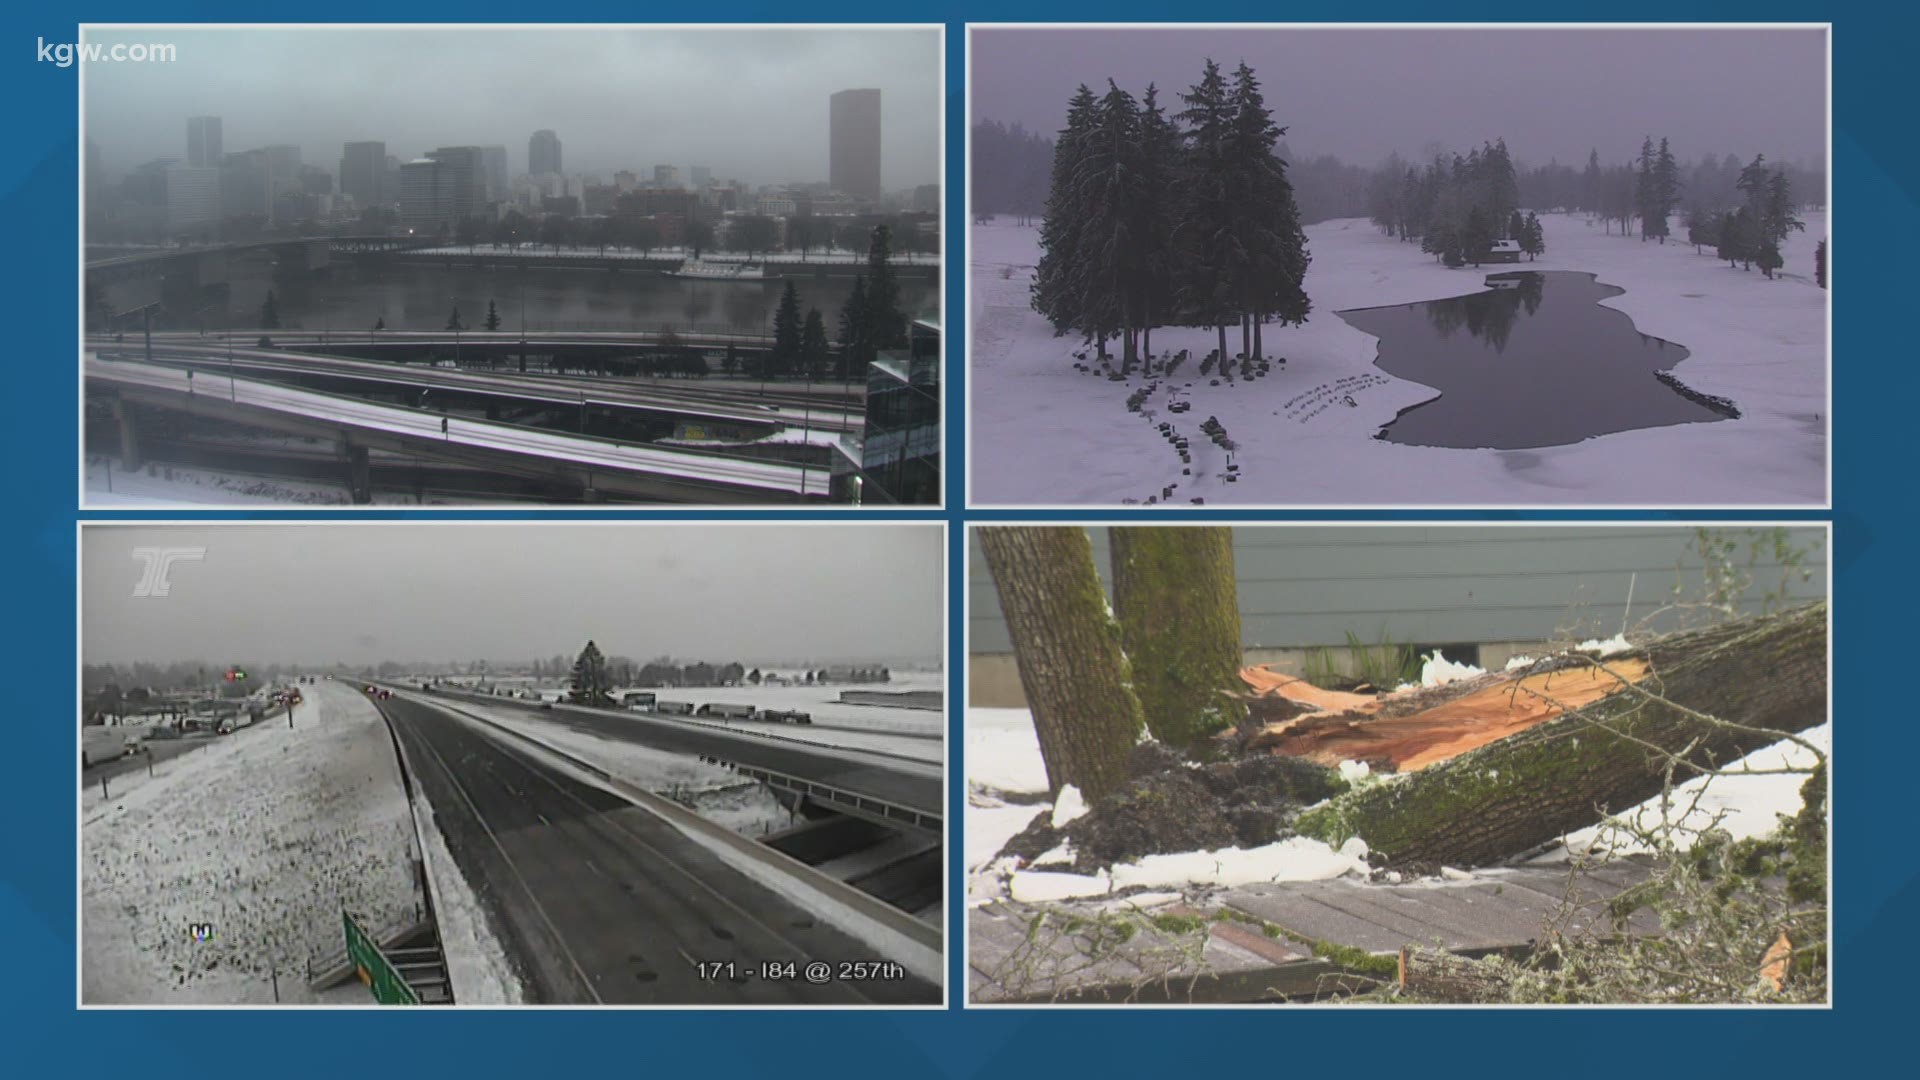 Your top stories during the severe winter weather that hit the Portland metro and surrounding areas on Valentine's Day, 2021.